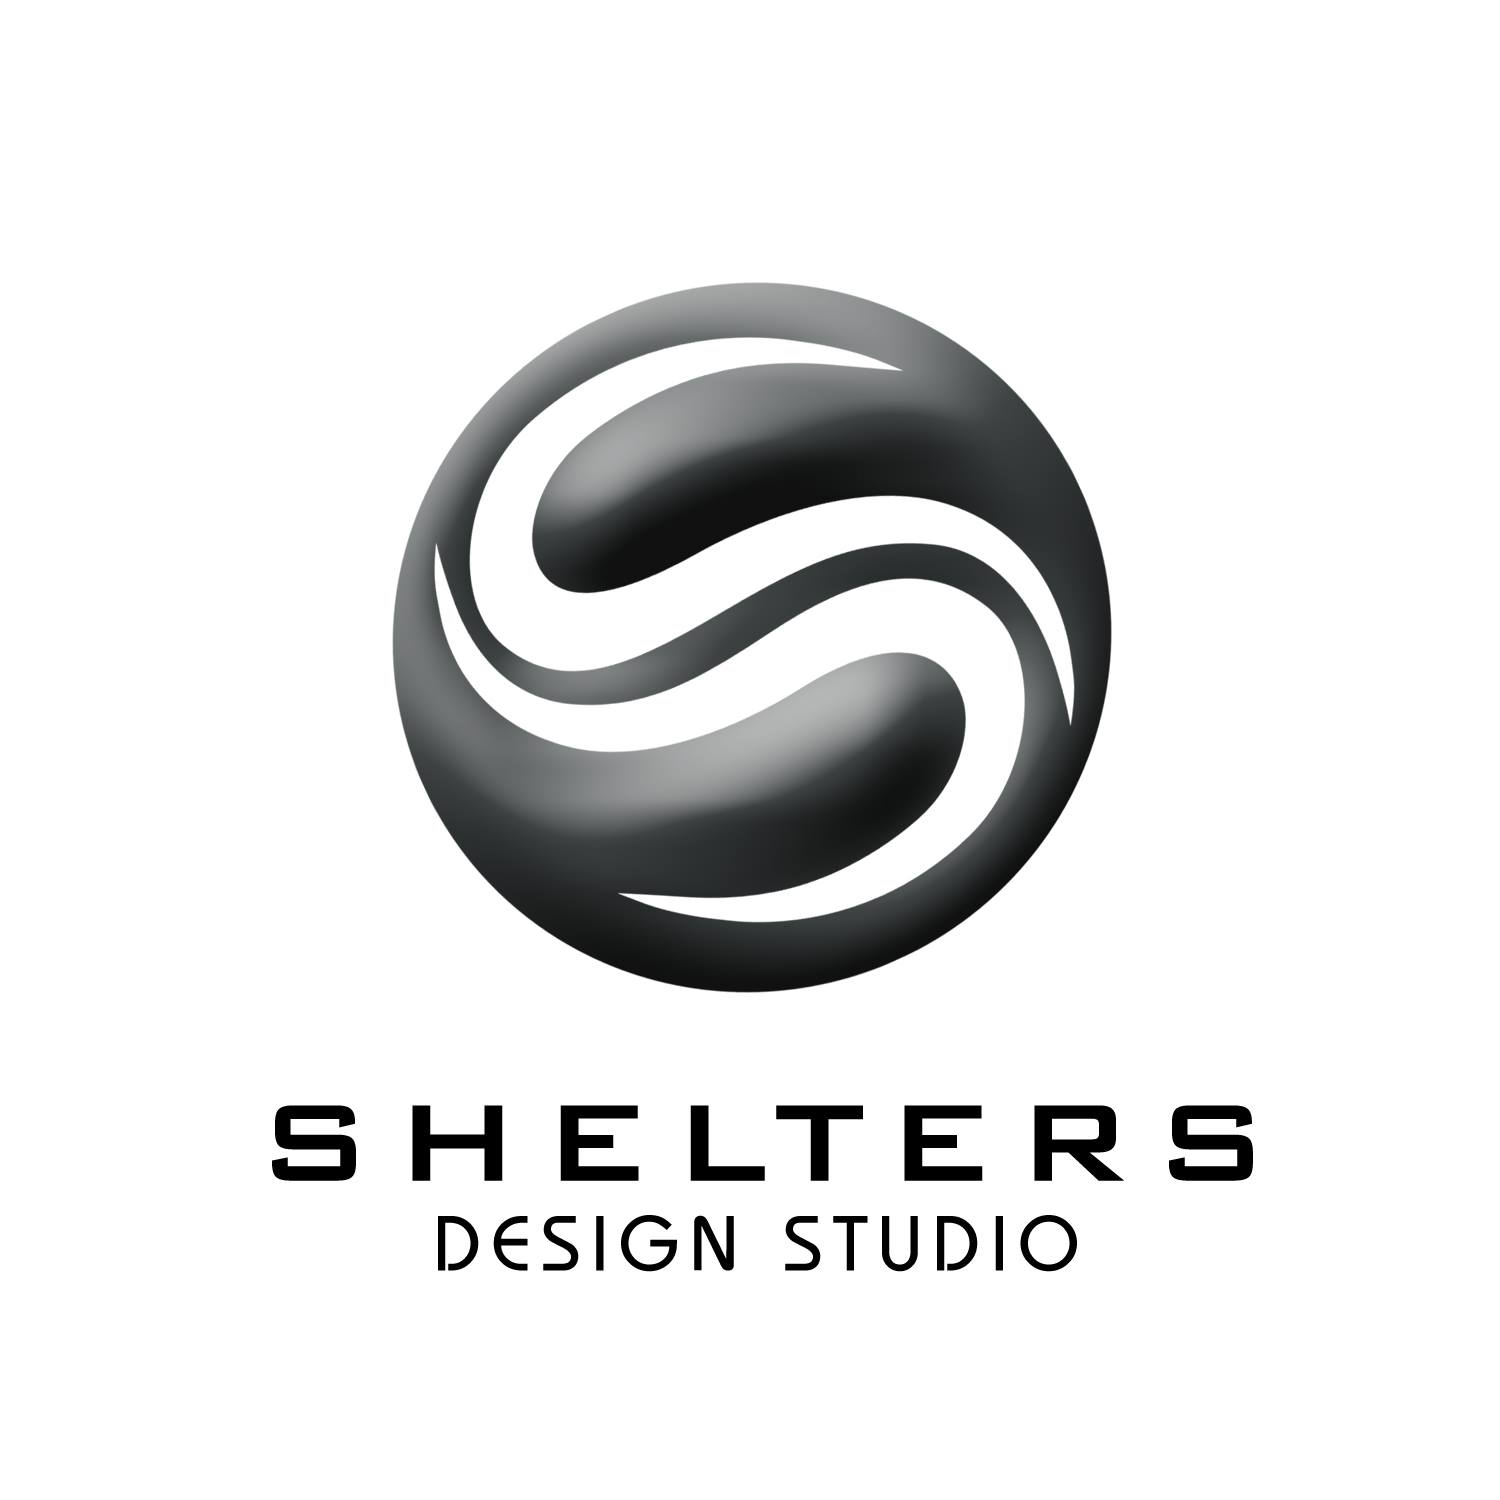 Shelters Design Studio|Accounting Services|Professional Services